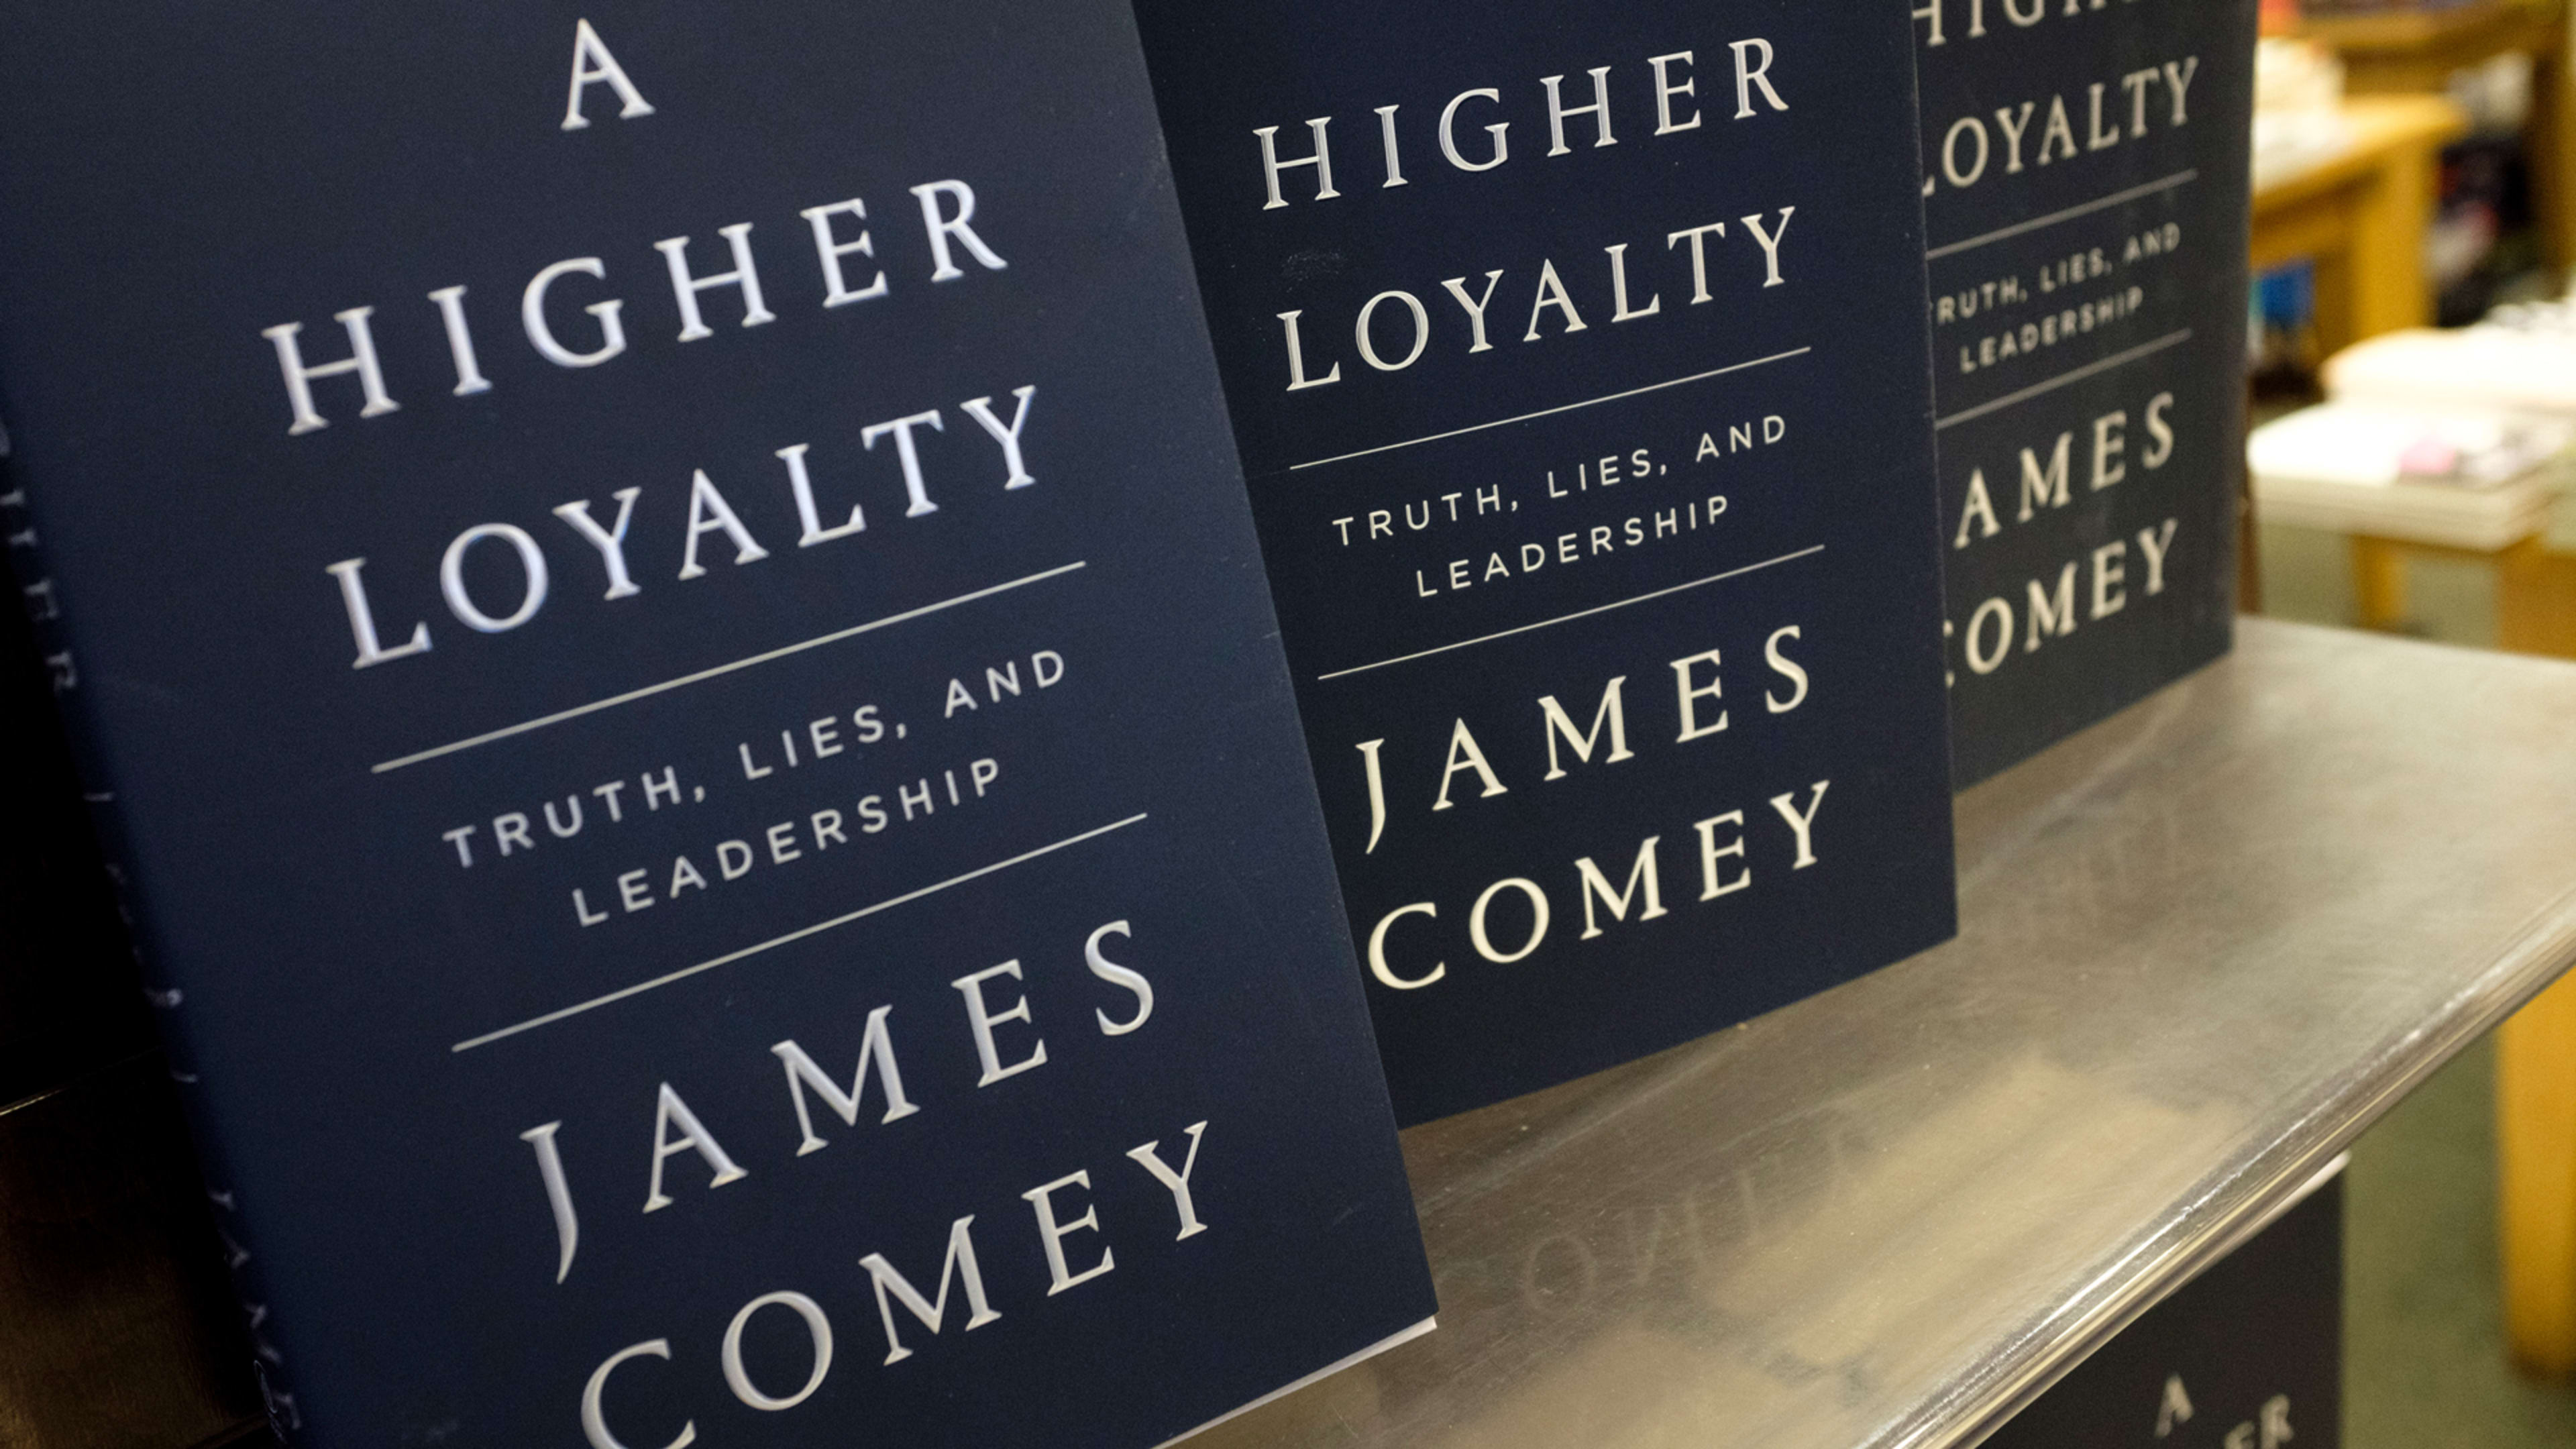 James Comey book sales: How does he stack up against Michael Wolff?